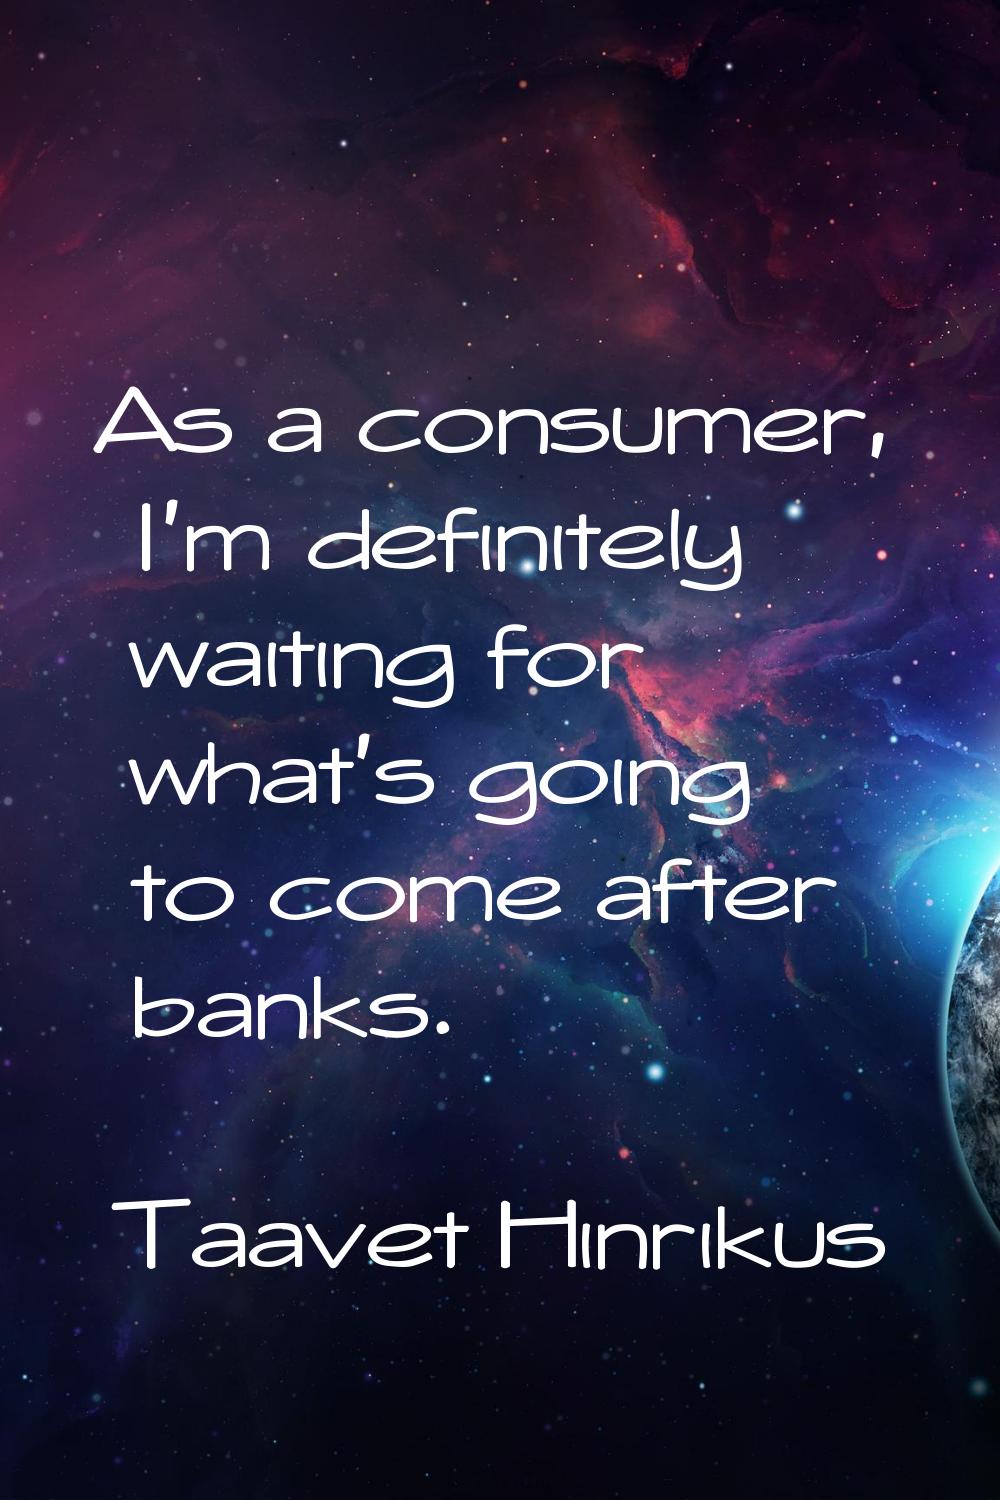 As a consumer, I'm definitely waiting for what's going to come after banks.